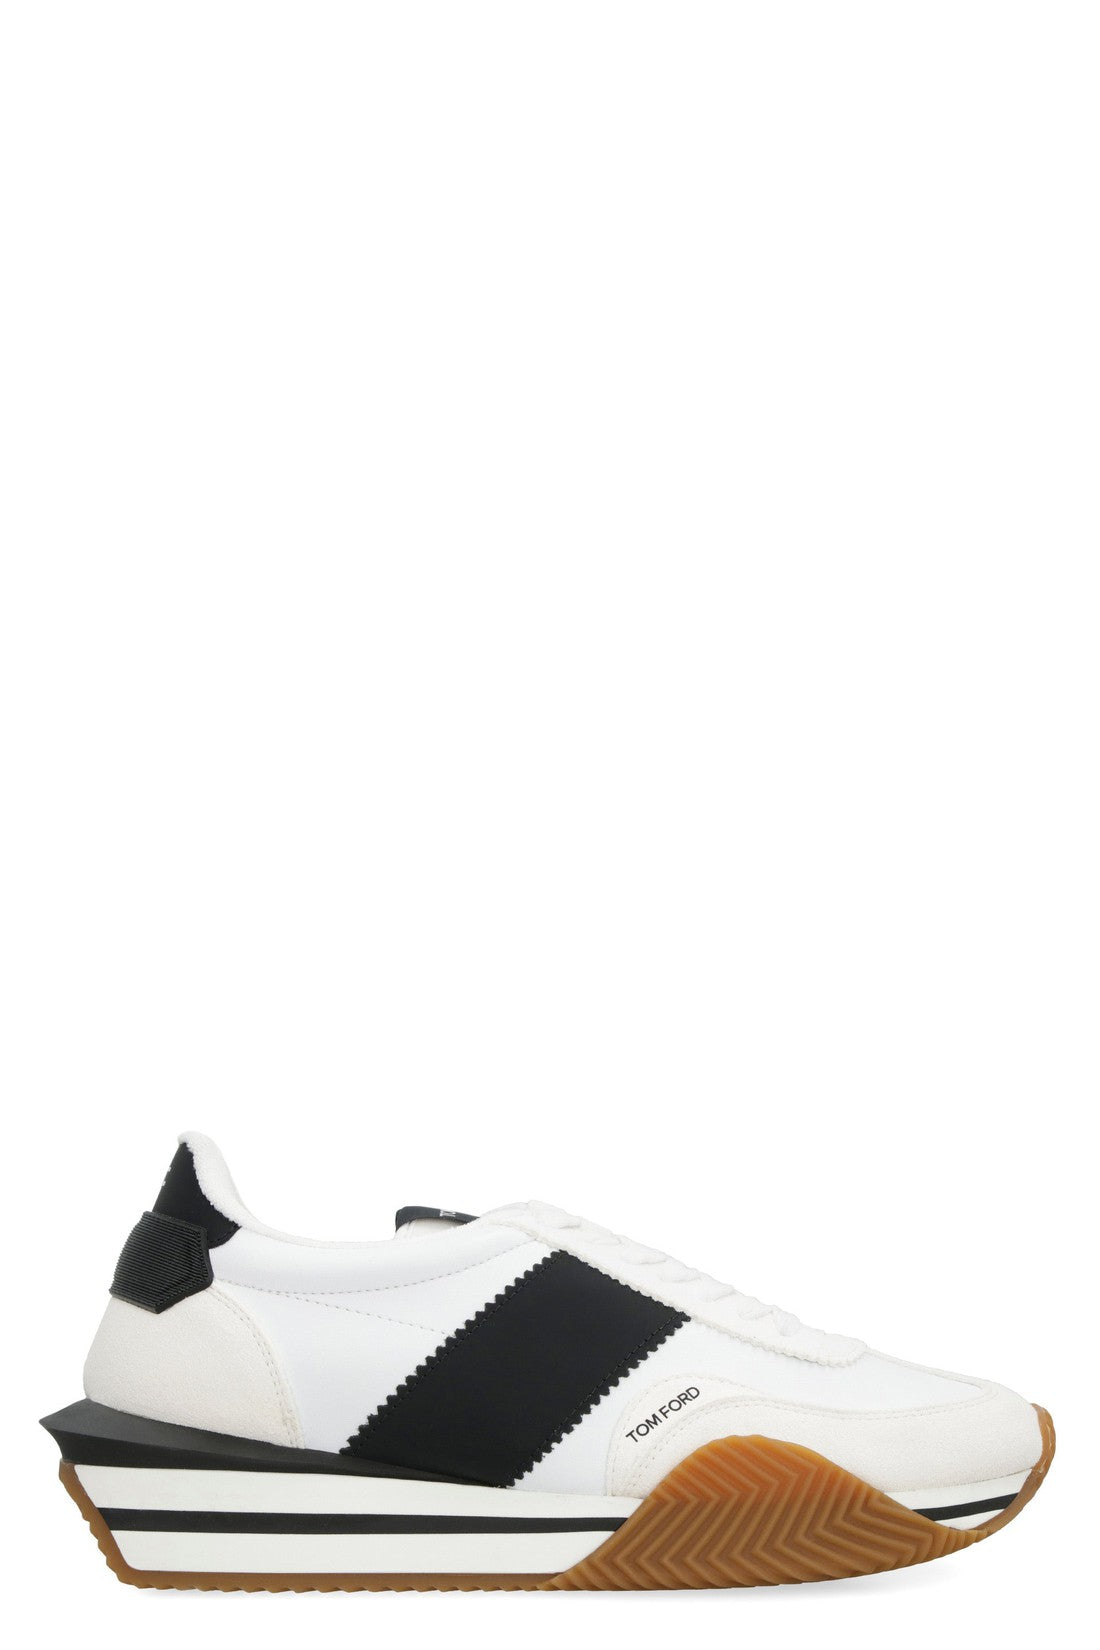 Tom Ford-OUTLET-SALE-James leather low-top sneakers-ARCHIVIST